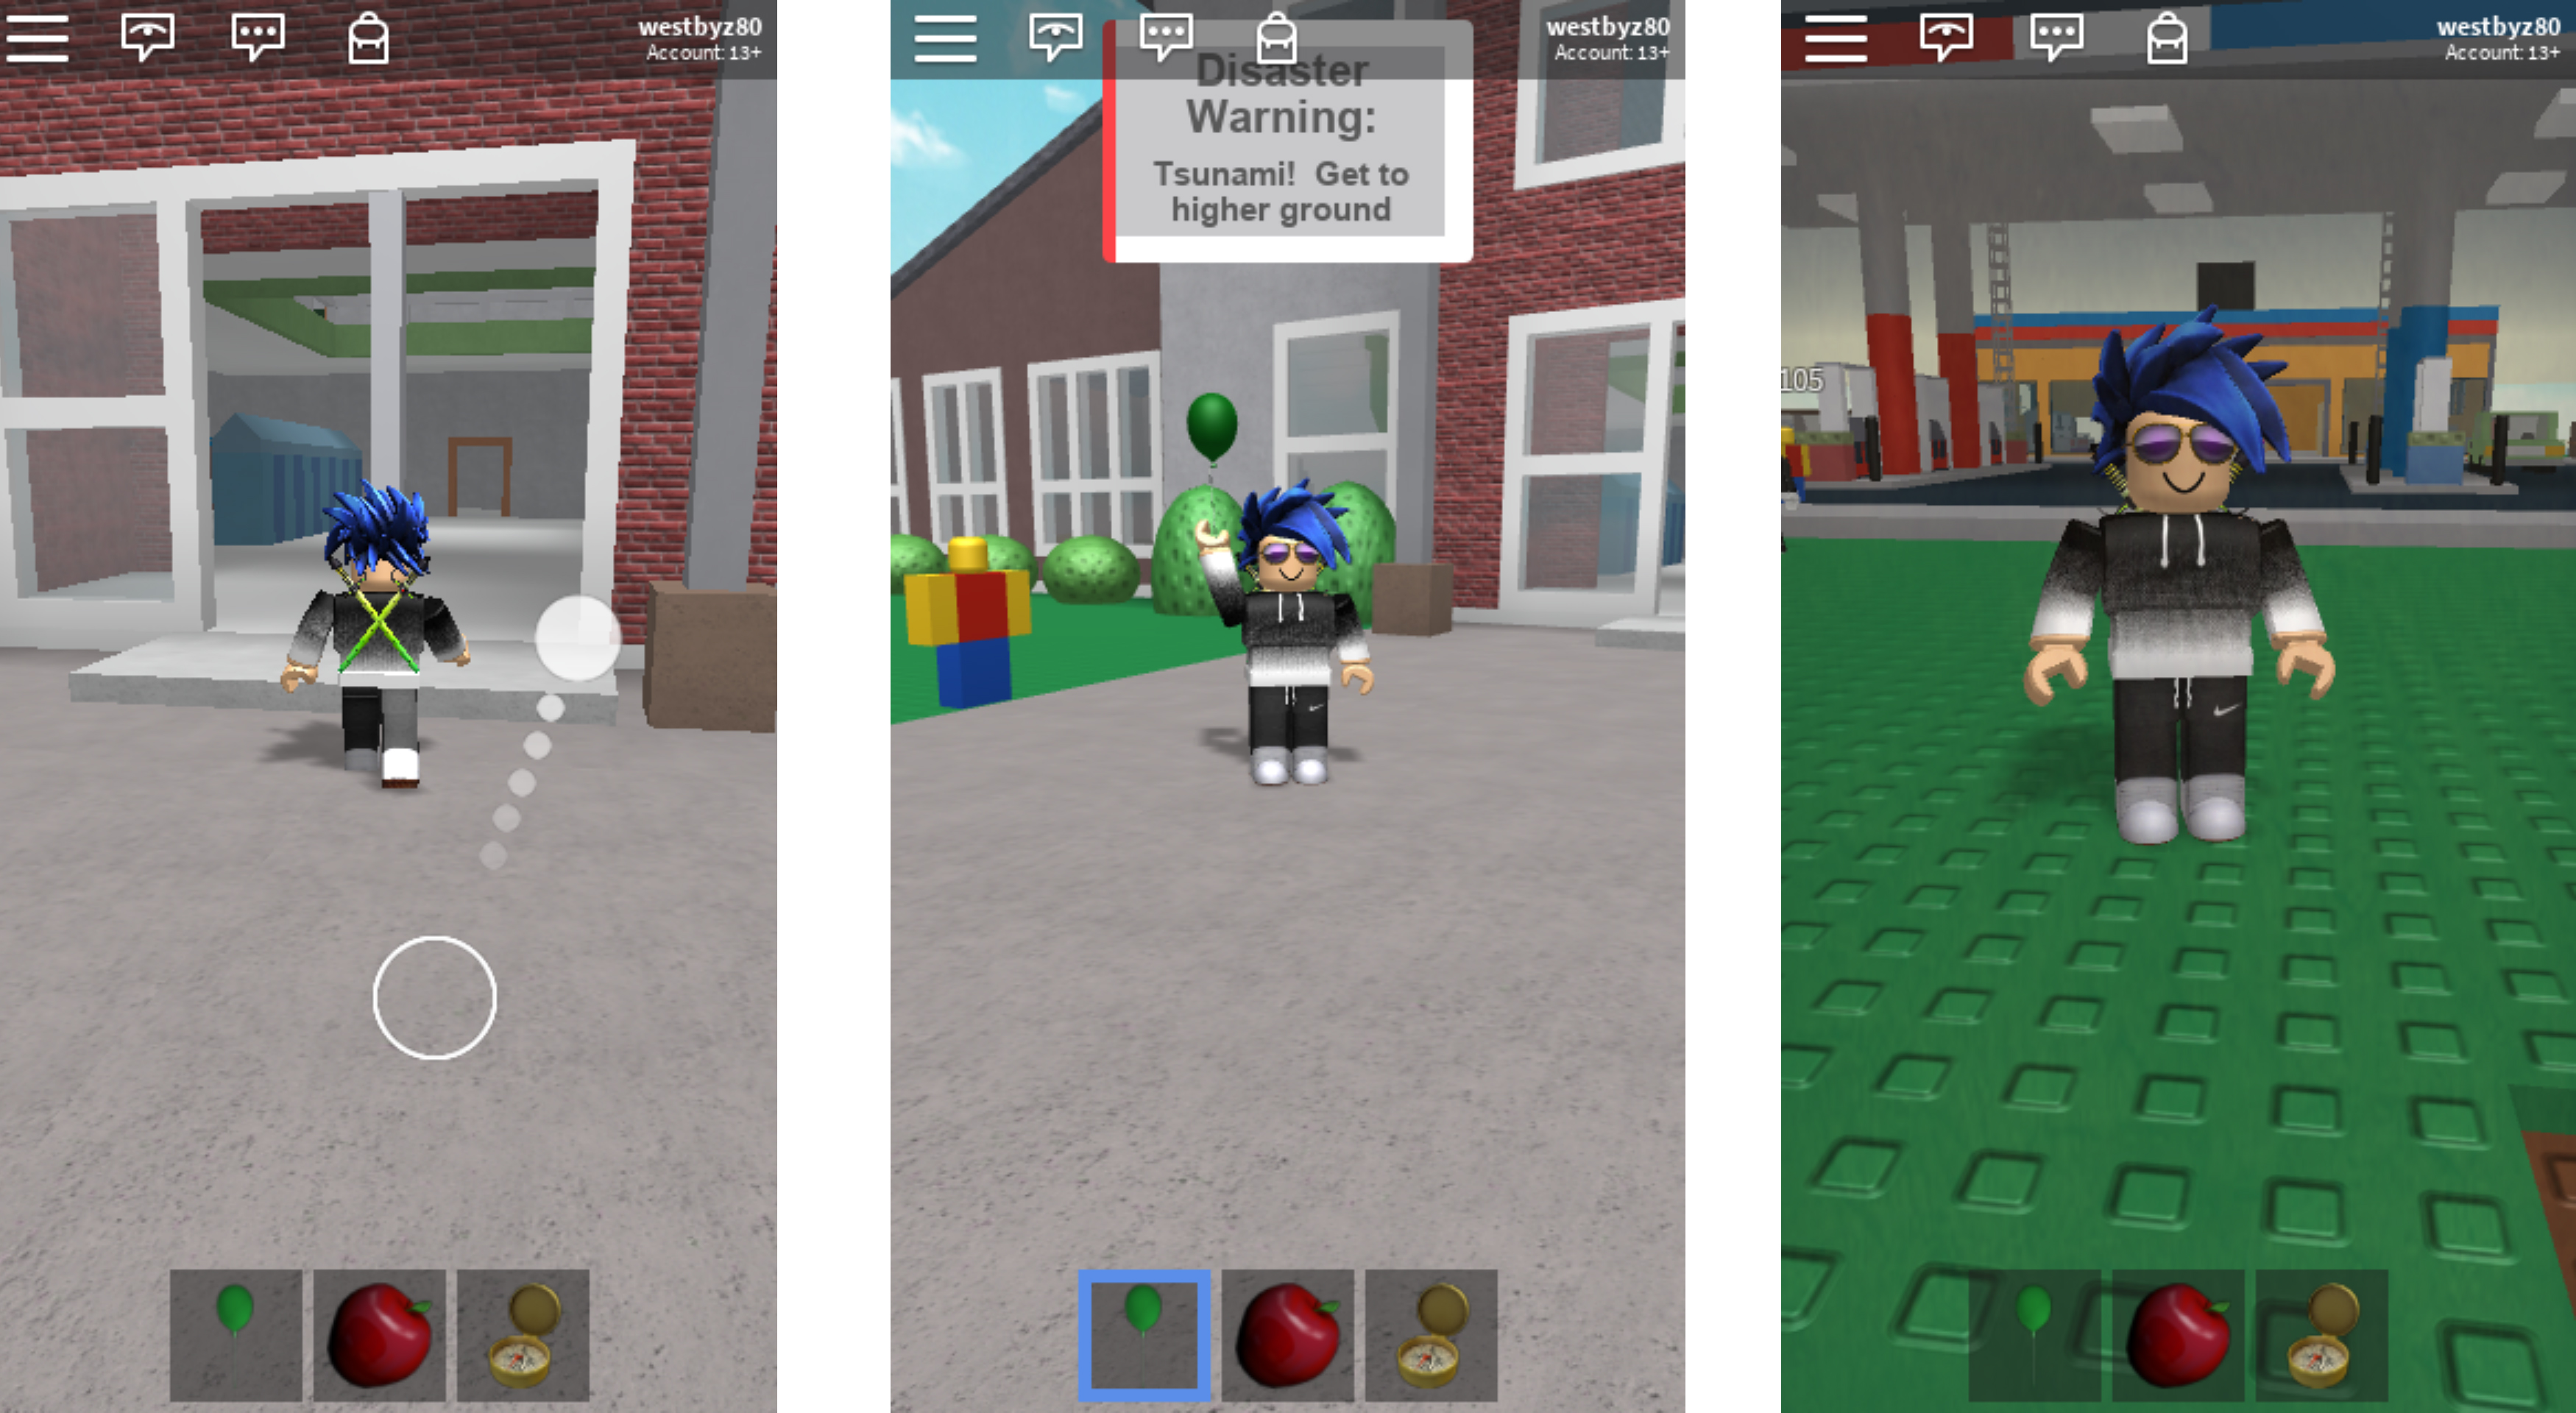 Introducing Portrait Mode & Dynamic Thumbstick - Roblox Blog